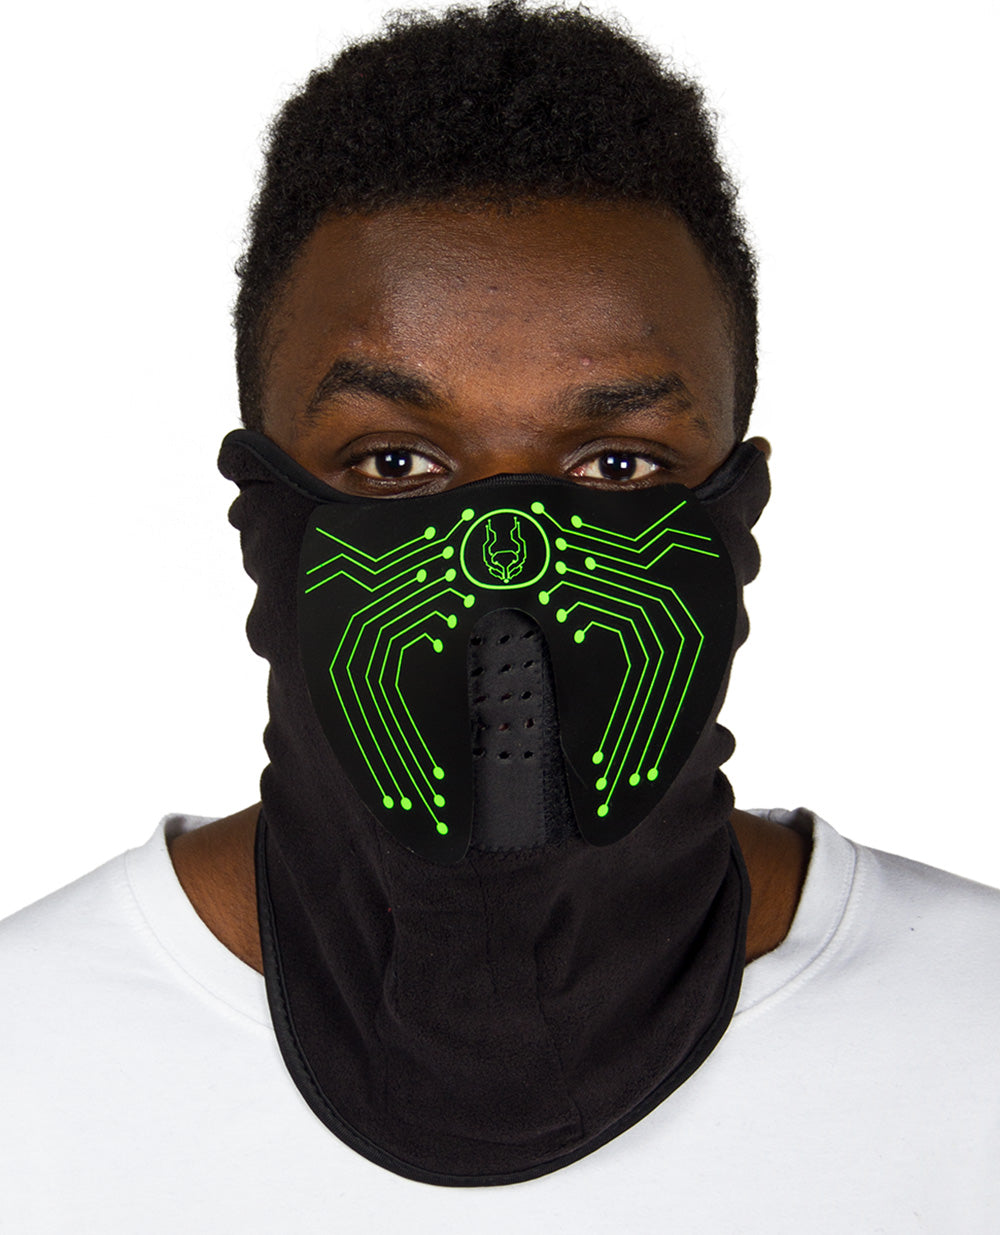 MICROCHIP RECHARGEABLE MASK.